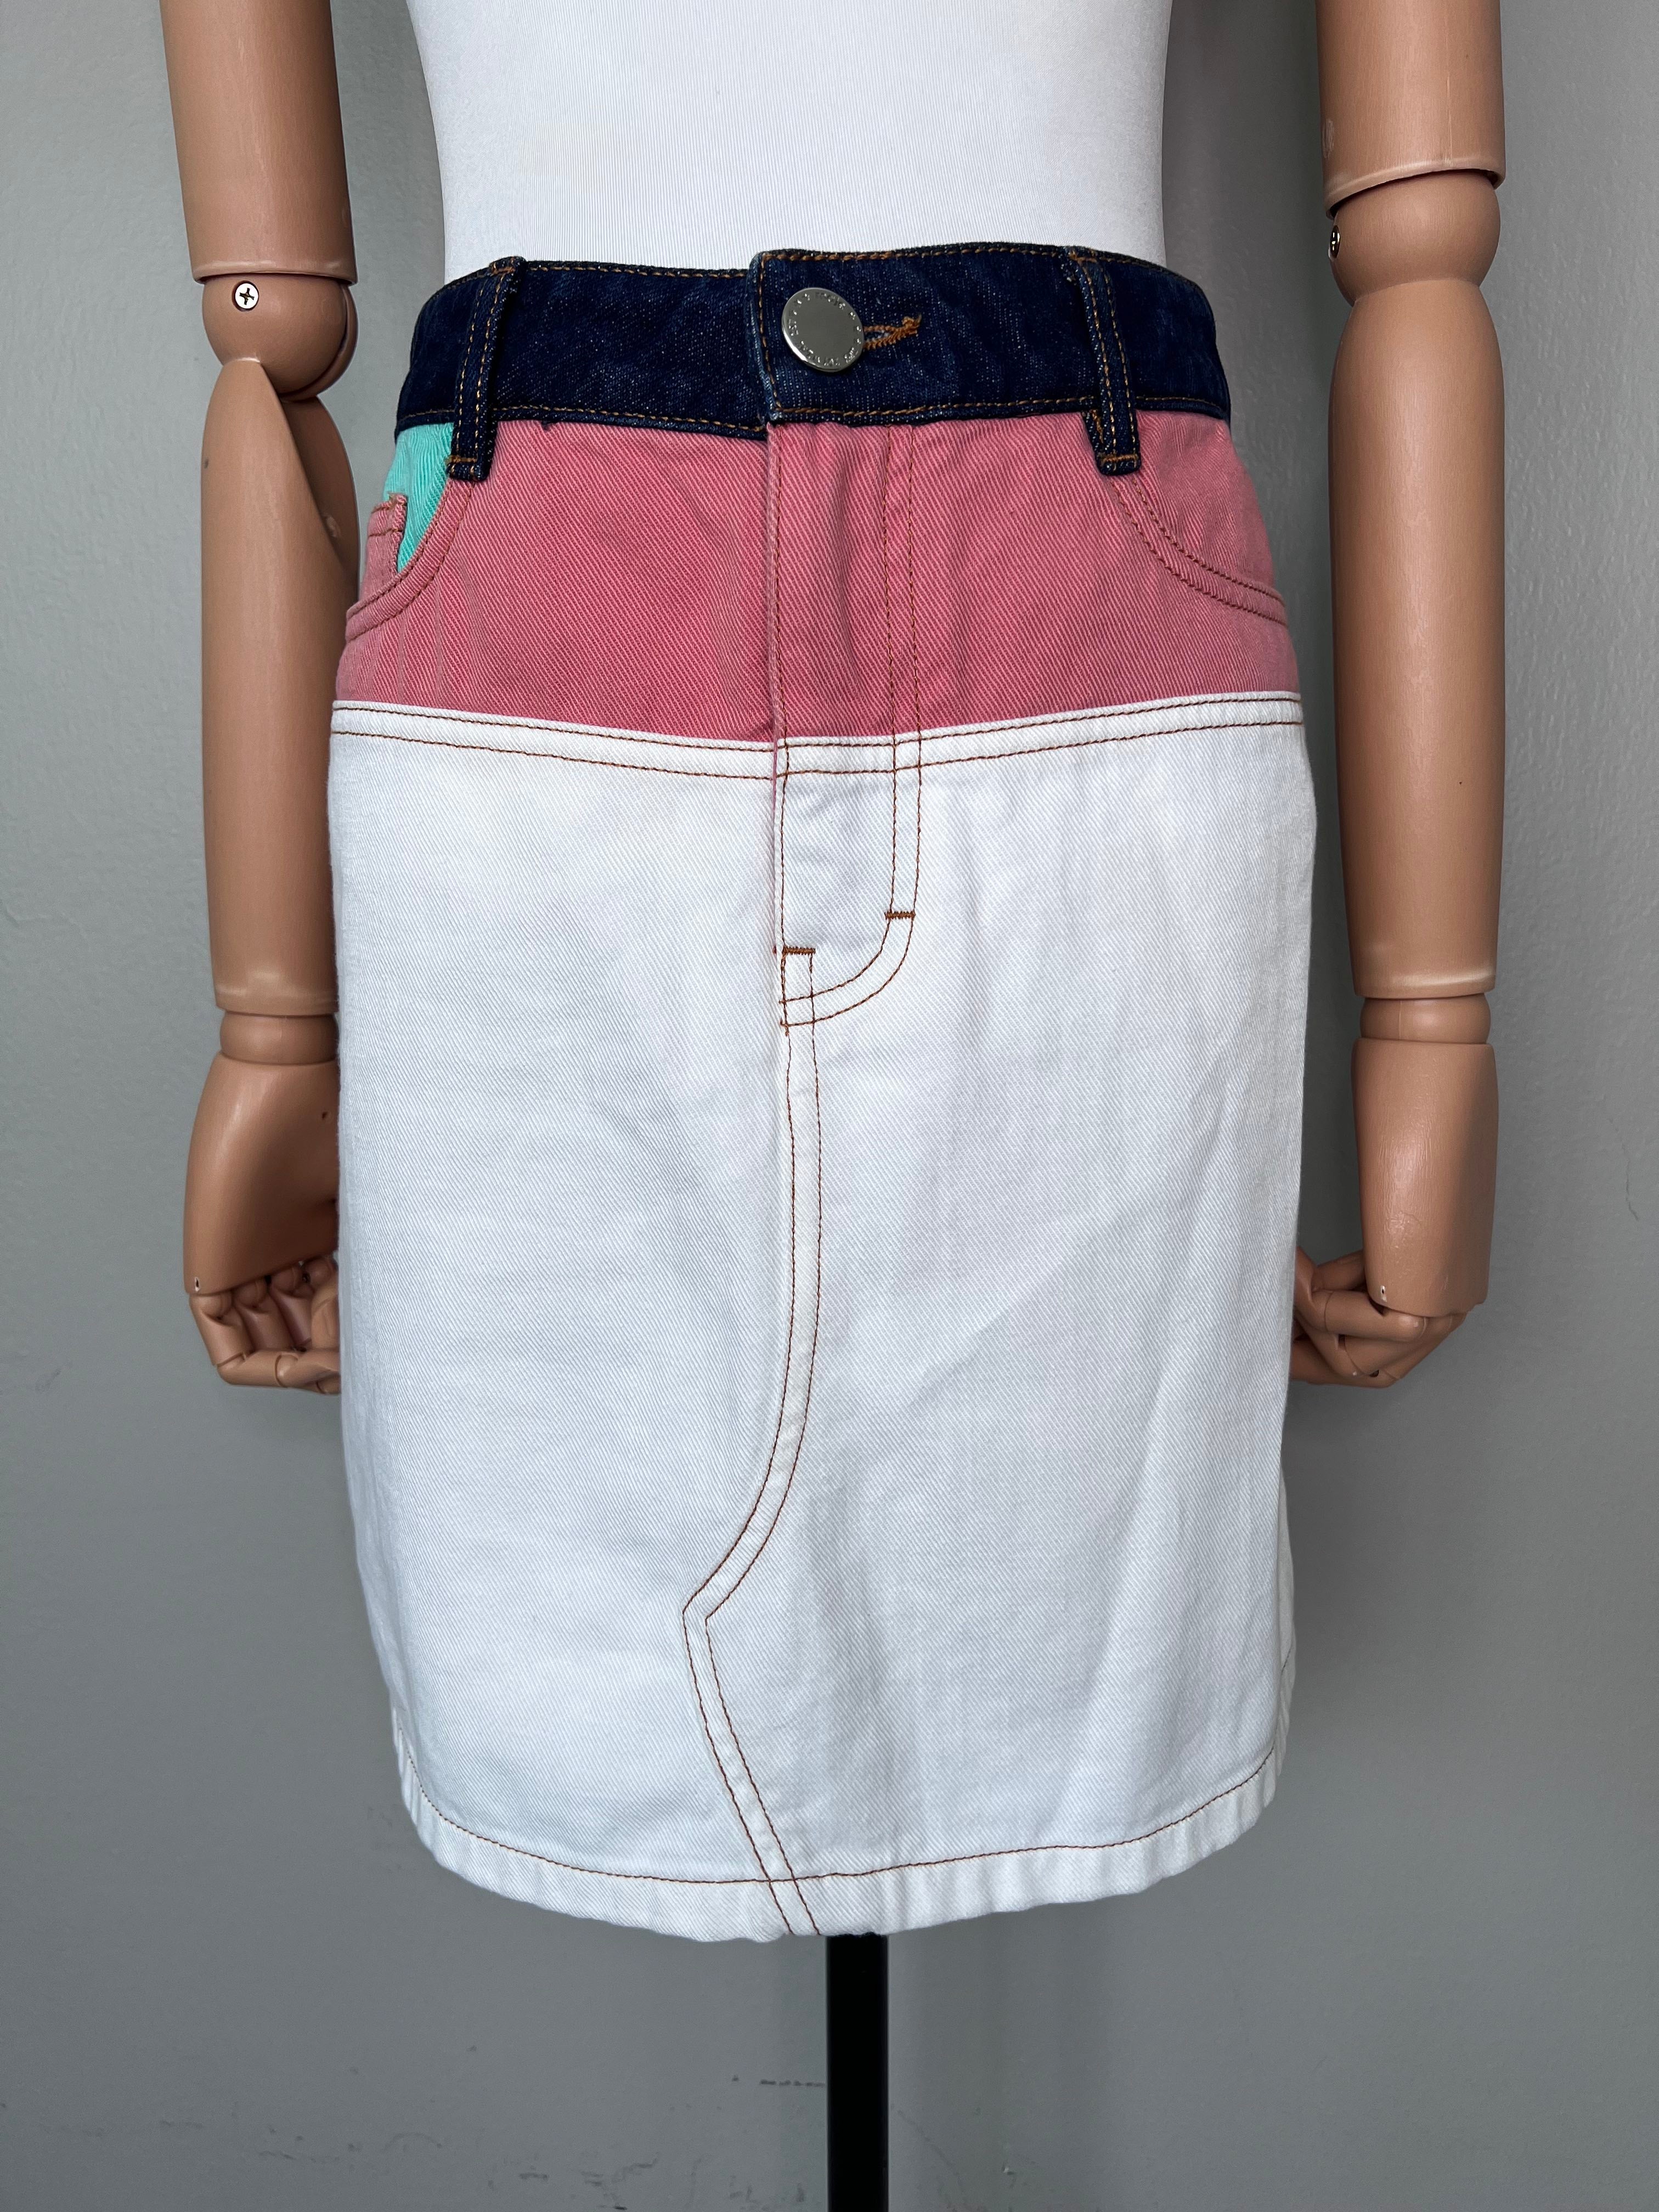 Mini multicolored denim skirt with blue denim waistband, one green pocket, pink denim across the top part, and blue denim on the back pocket. - MAJE